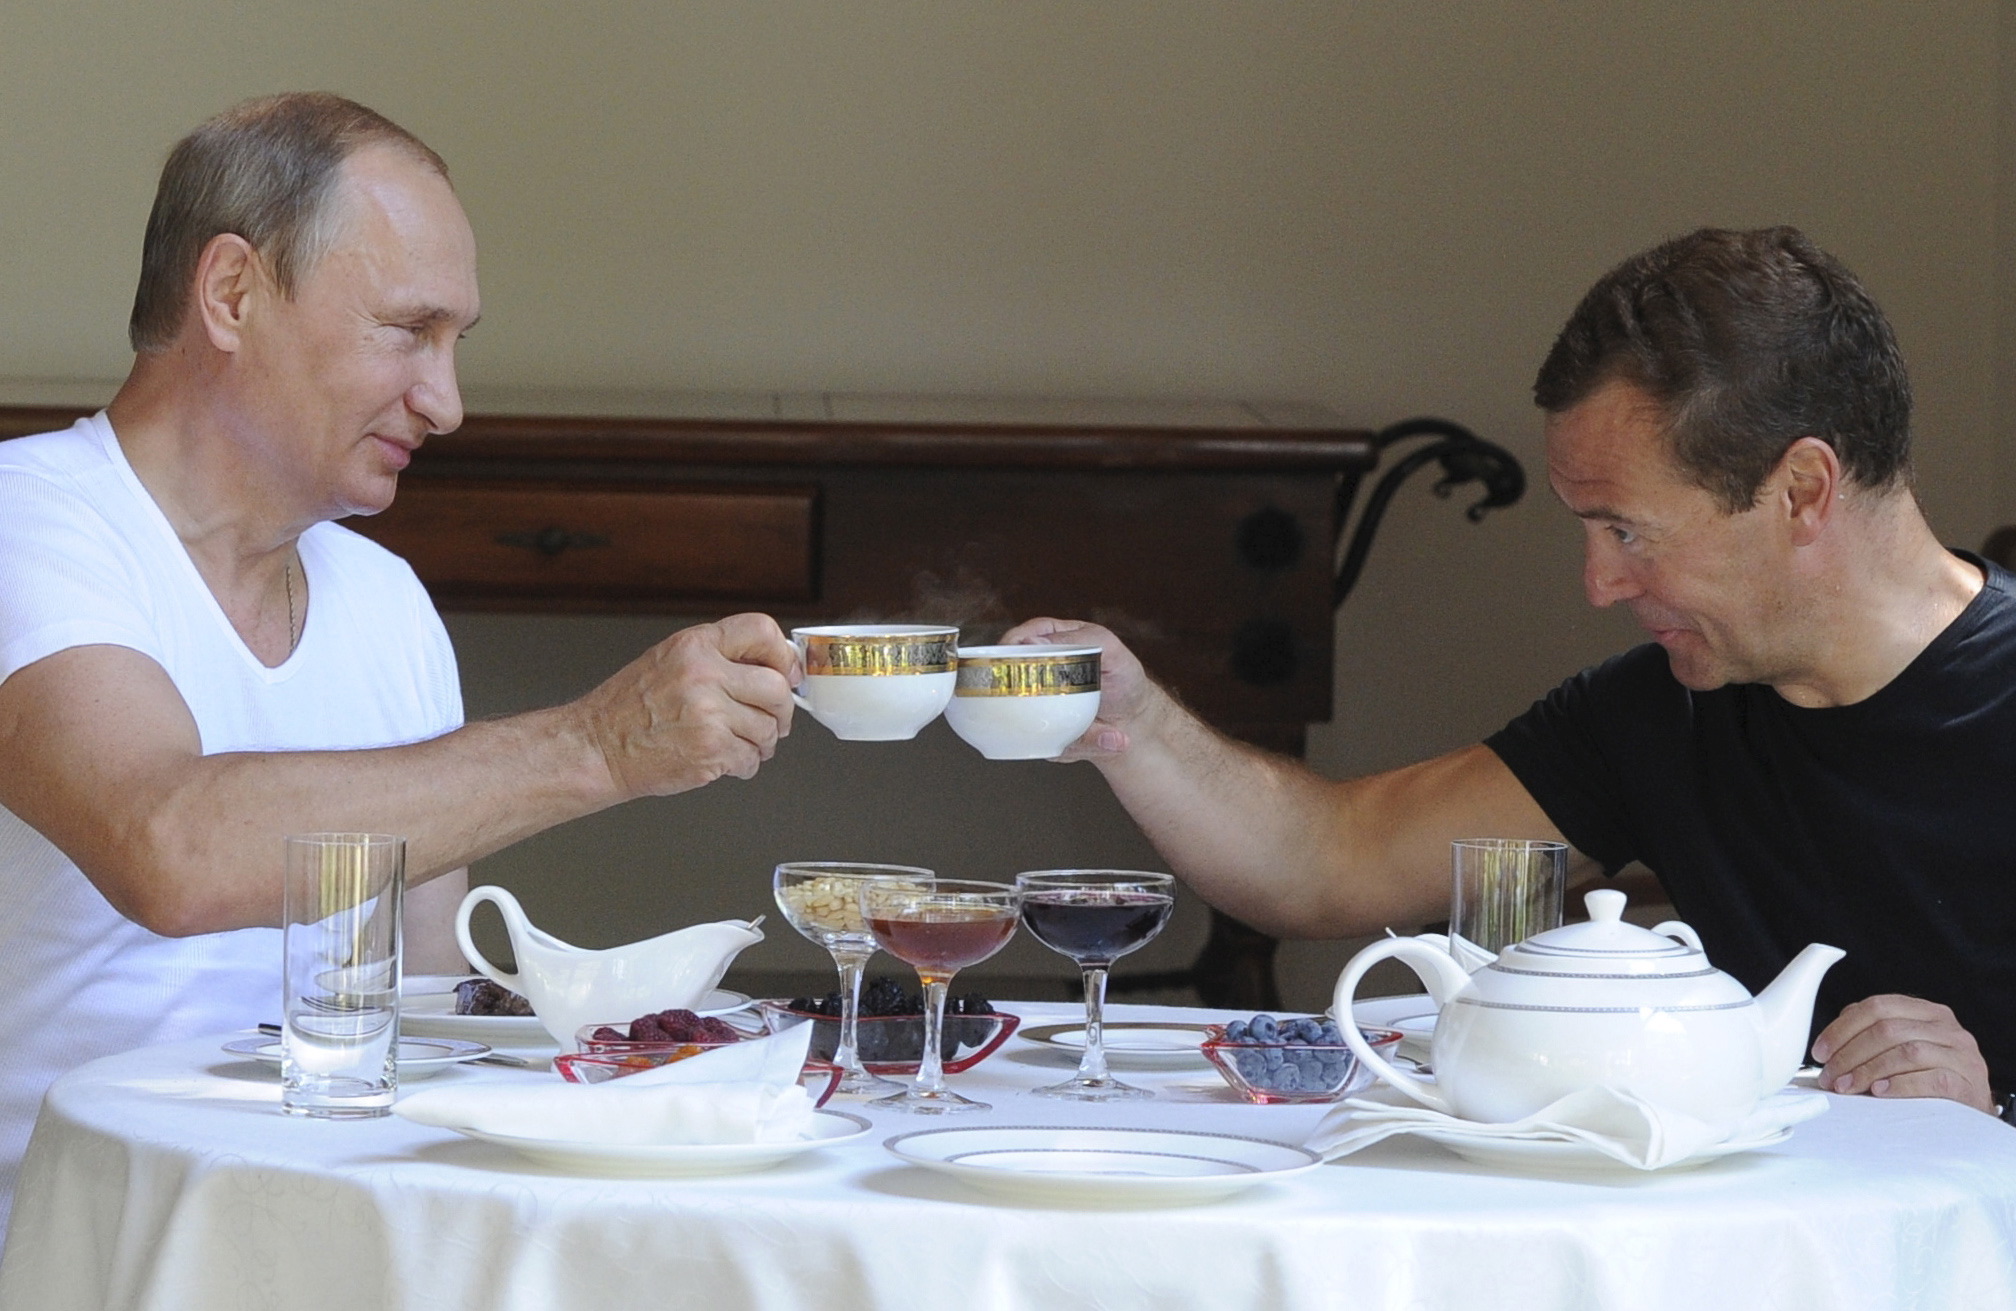 PHOTO: Russian President Vladimir Putin and Prime Minister Dmitry Medvedev toast with tea cups during breakfast at the Bocharov Ruchei state residence in Sochi, Russia, Aug. 30, 2015.